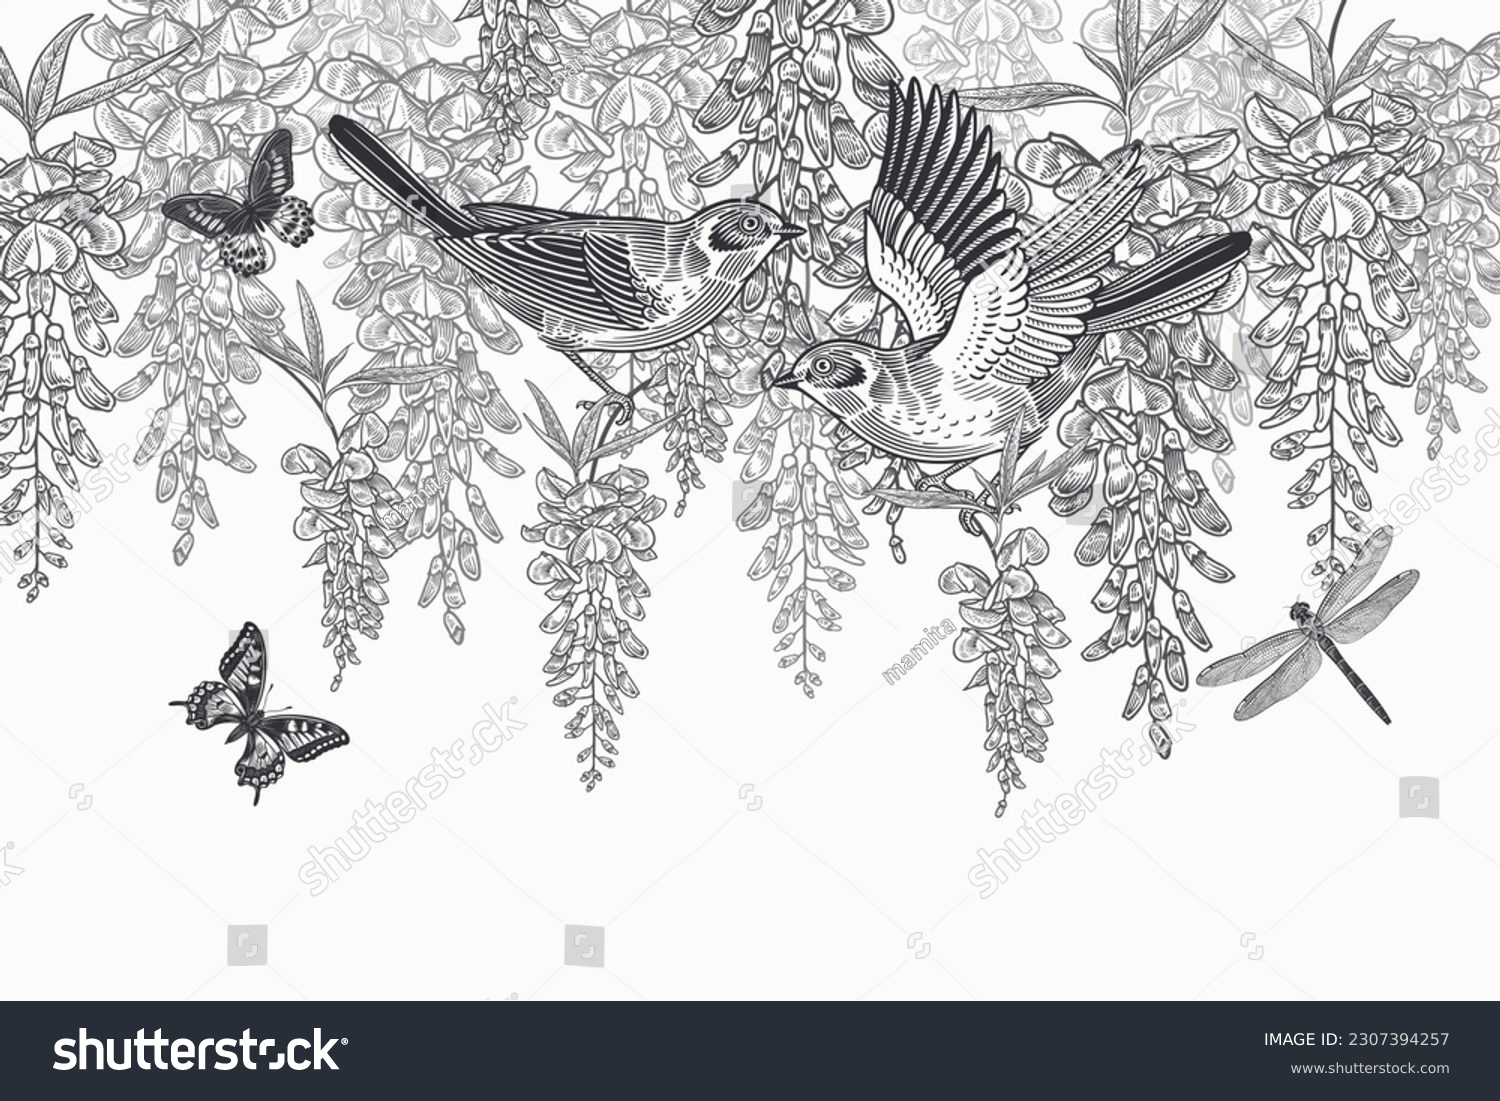 SVG of Wedding card. Cute birds, butterflies, dragonfly on tree branches Wisteria liana. Floral pattern. Garden Japanese flowers. Black and white. Vector illustration. Vintage decor Template for invitations. svg